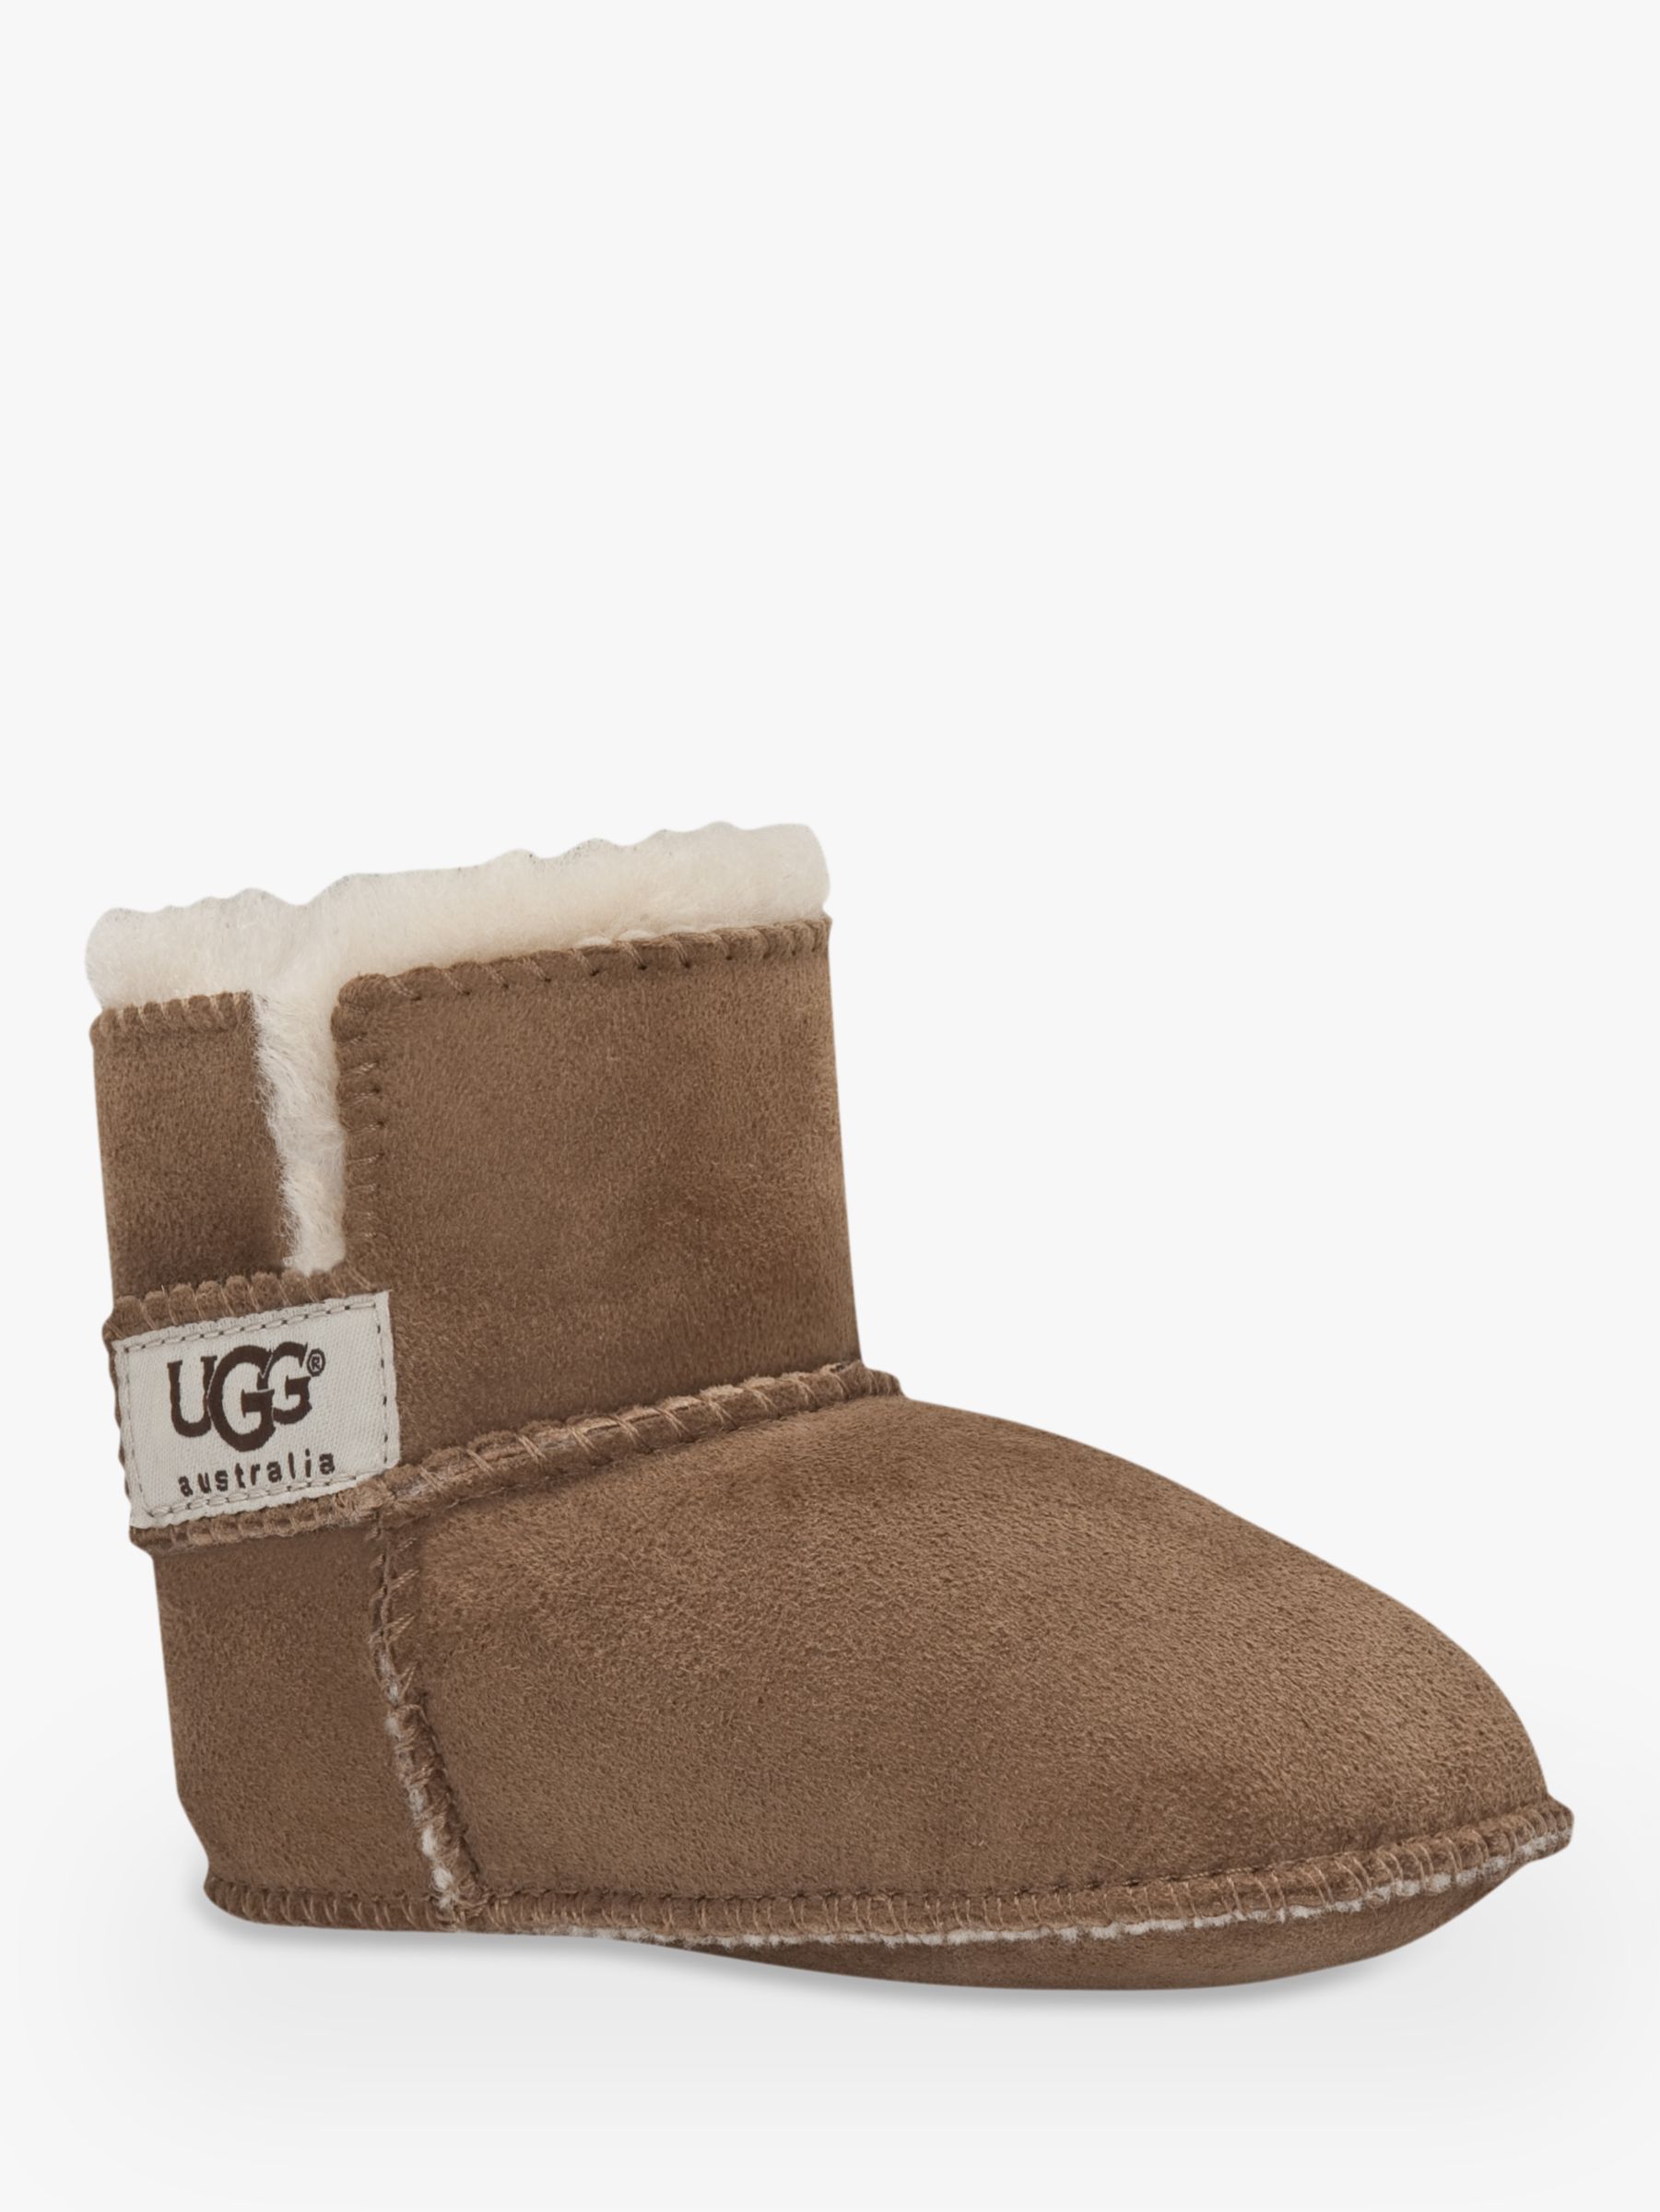 baby ugg boots black